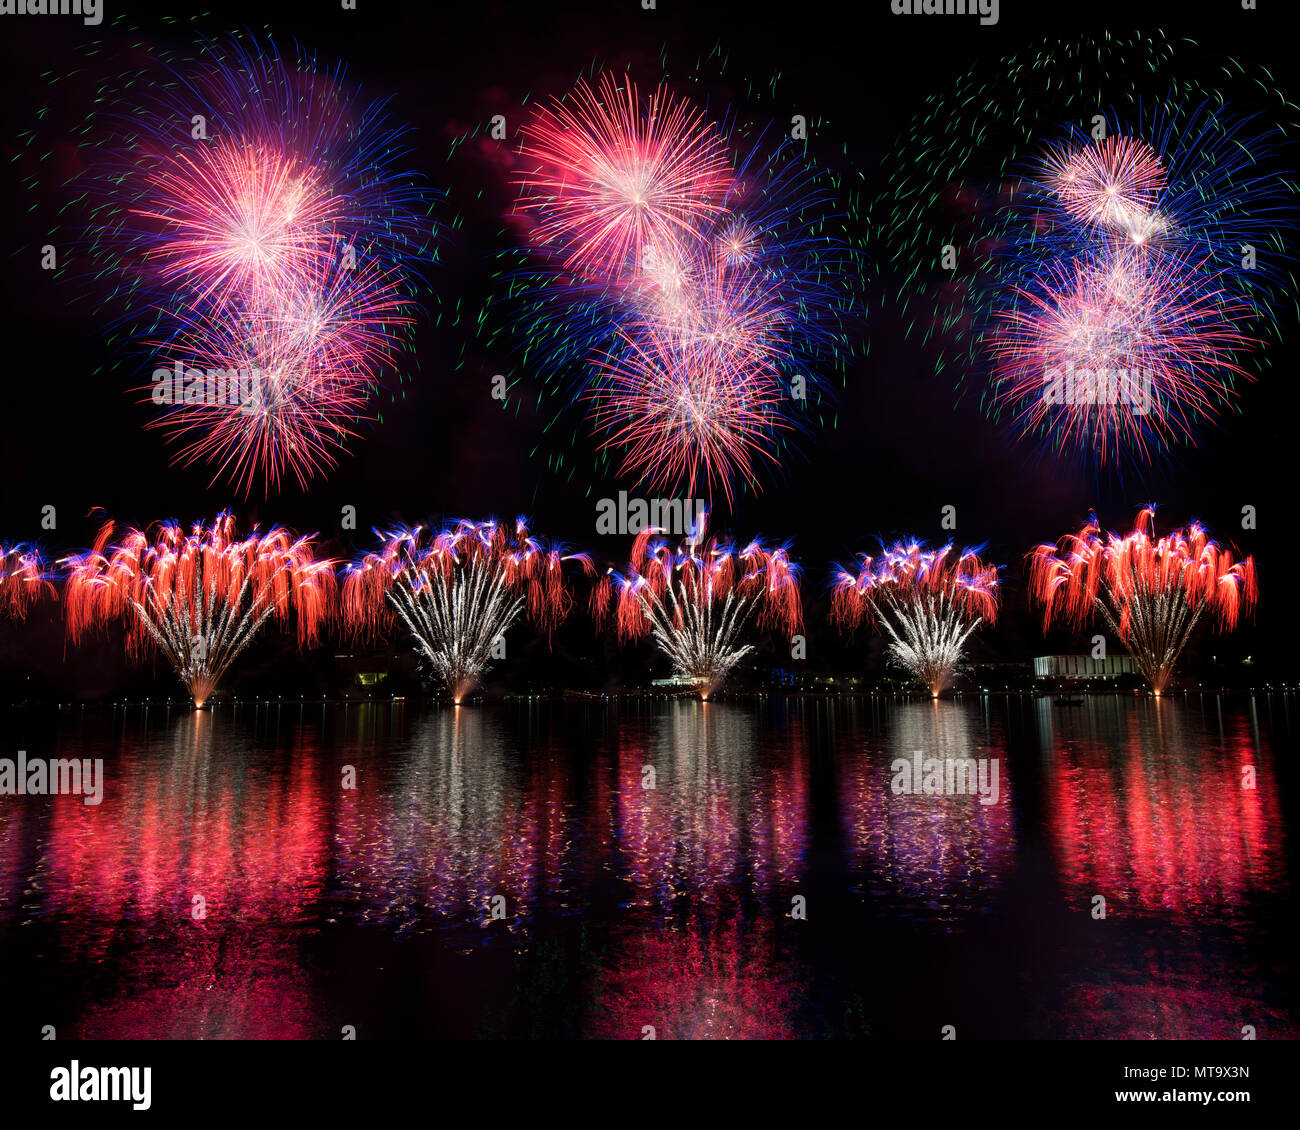 Skyfire 2018 Firework Display over Lake Burley Griffin, Canberra, Australian Capital Territory (ACT), Australia. Skyfire is an annual March fireworks  Stock Photo